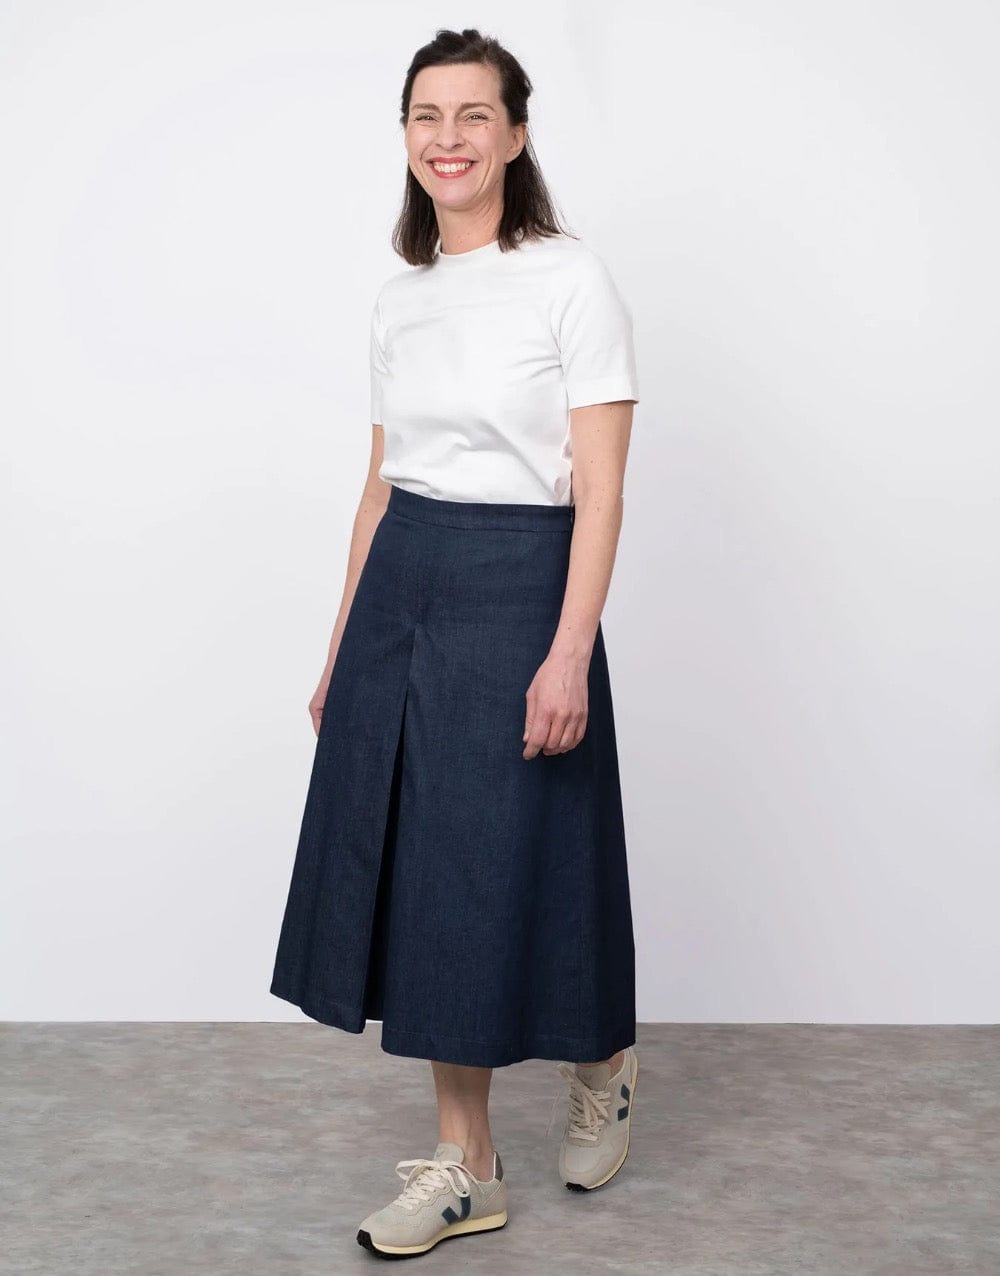 Culottes Sewing Pattern, The Assembly Line – Clothkits